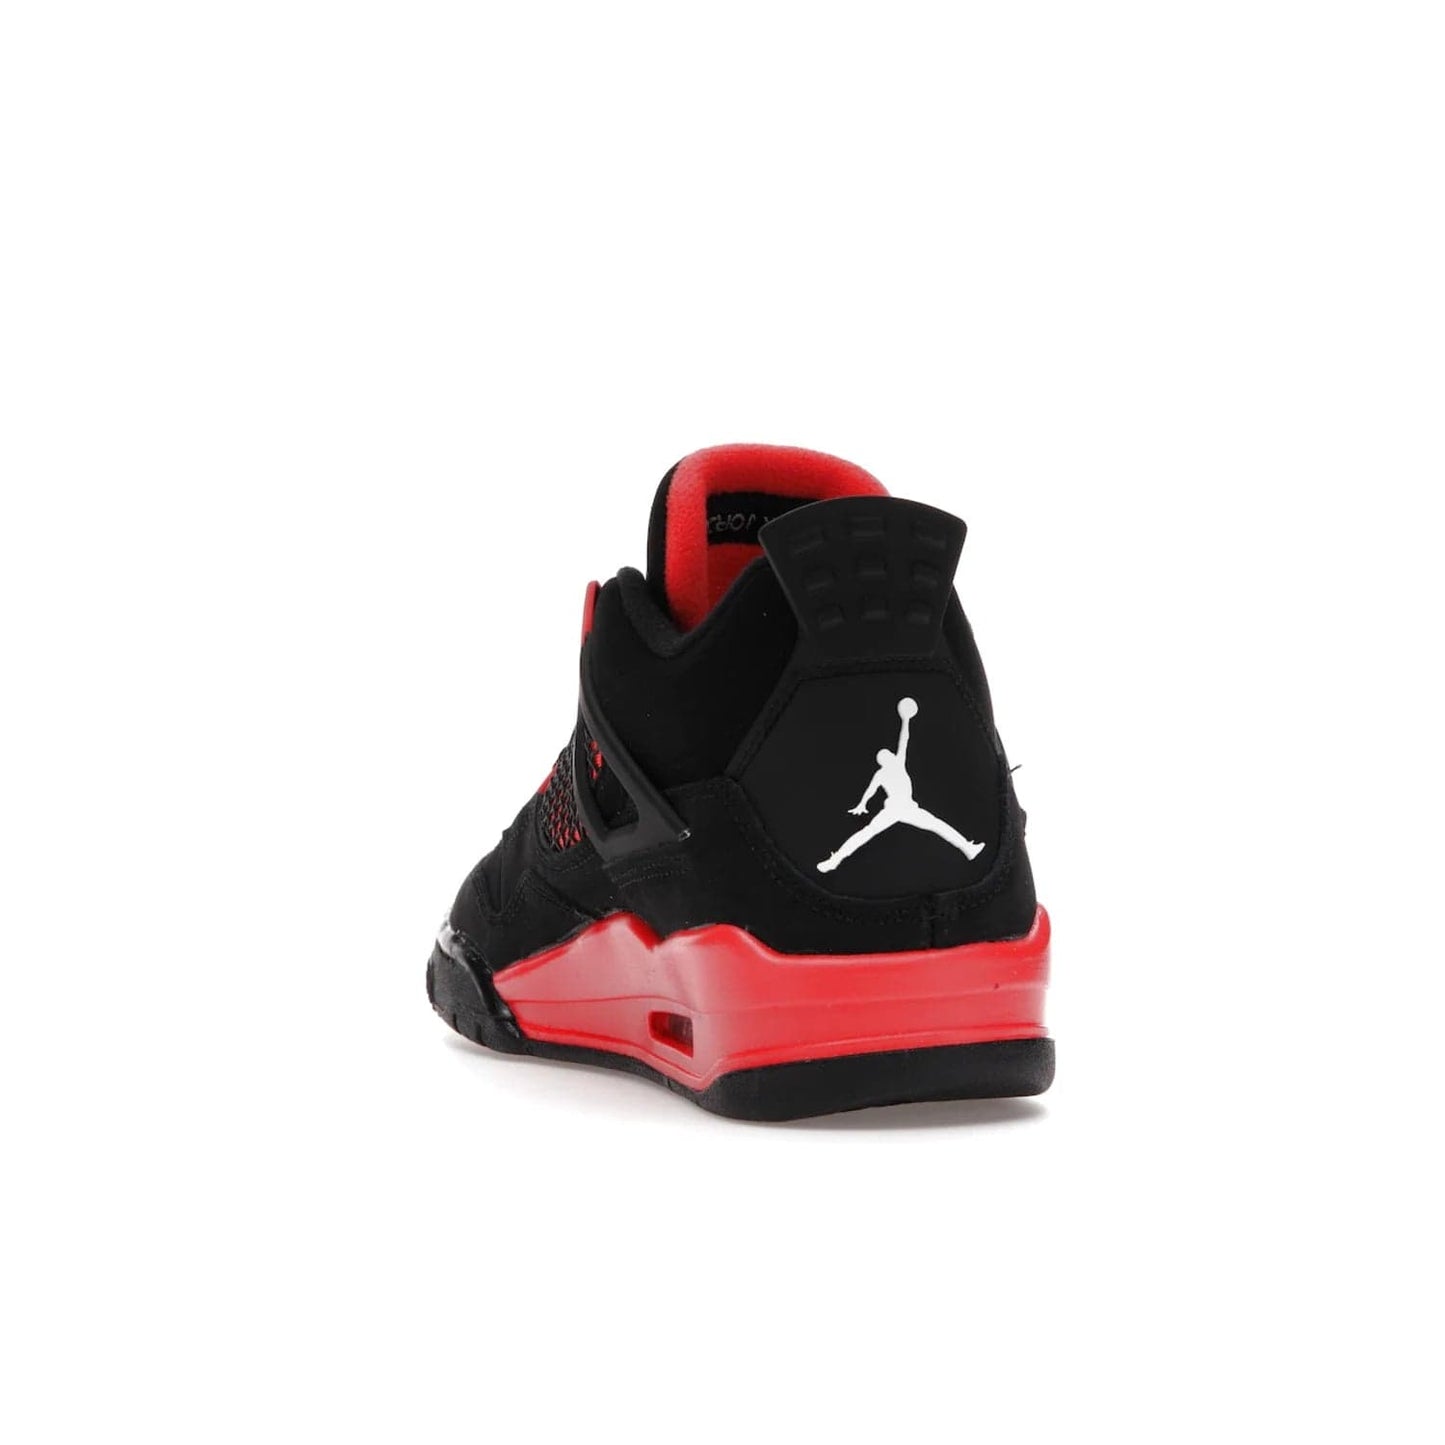 Jordan 4 Retro Red Thunder (GS) - Image 26 - Only at www.BallersClubKickz.com - The Air Jordan 4 Retro Red Thunder GS features a stylish black and crimson upper with a Jumpman logo. Athletic midsole with Air bubbles for cushioning and black rubber outsole with iconic motif complete this classic sneaker.